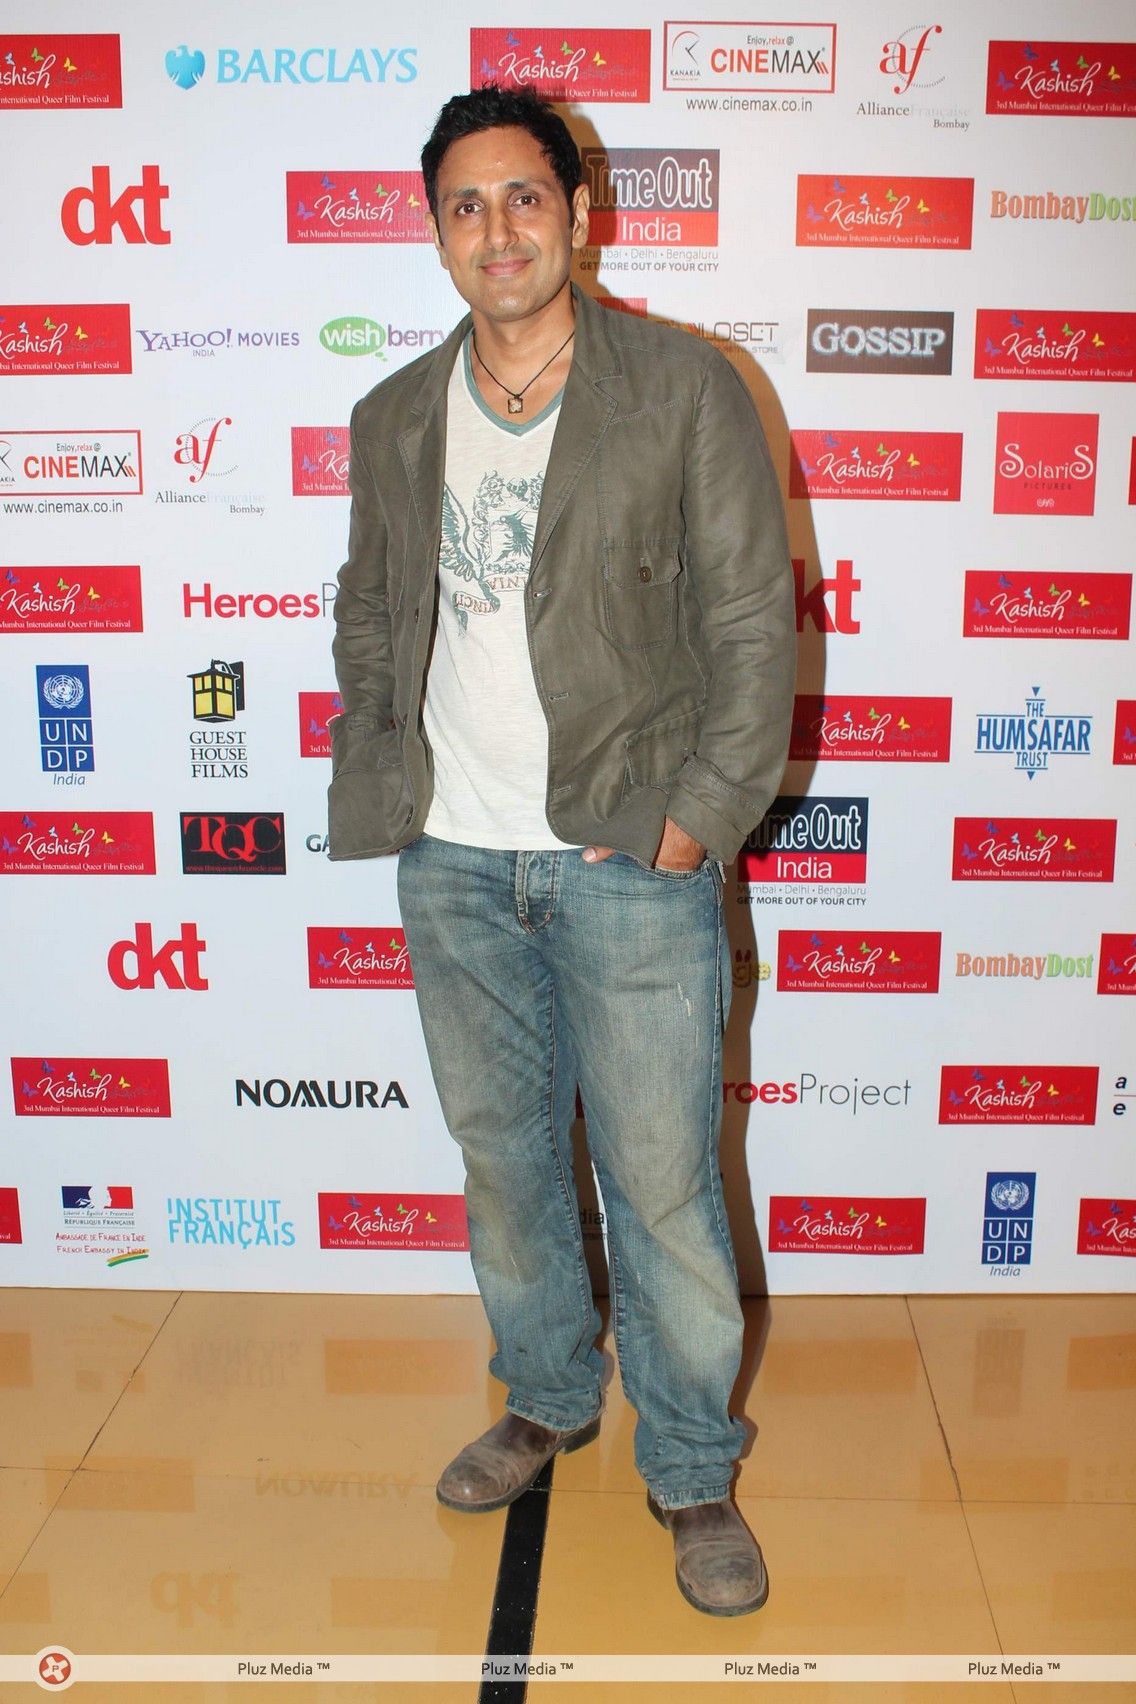 Celebs at Kashish film festival 2012 - Photos | Picture 202184